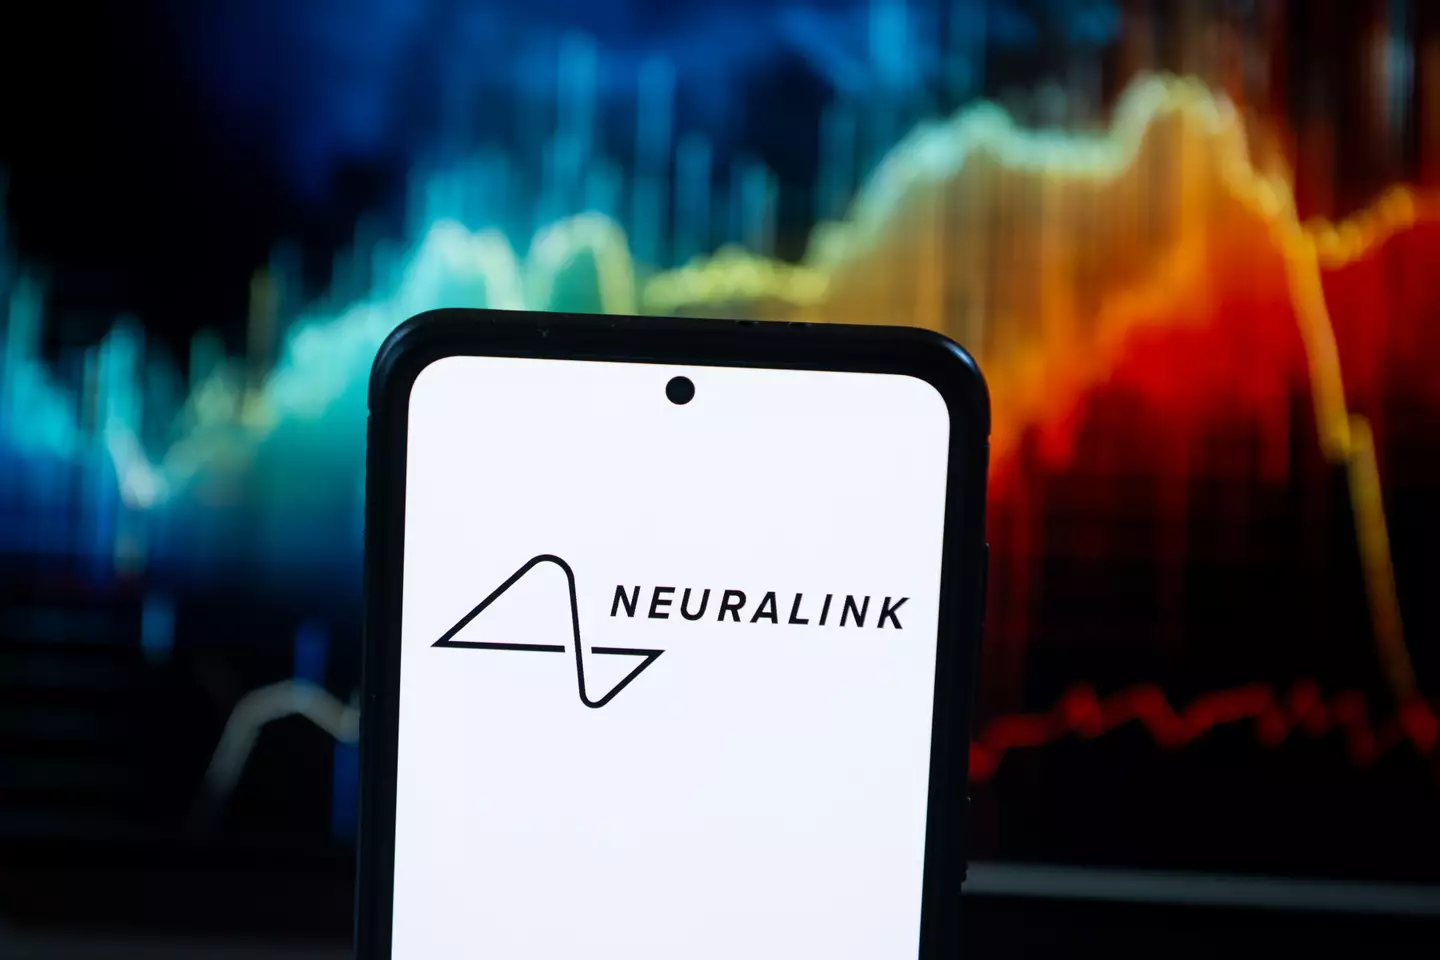 Neuralink researches implanting chips into the brain.